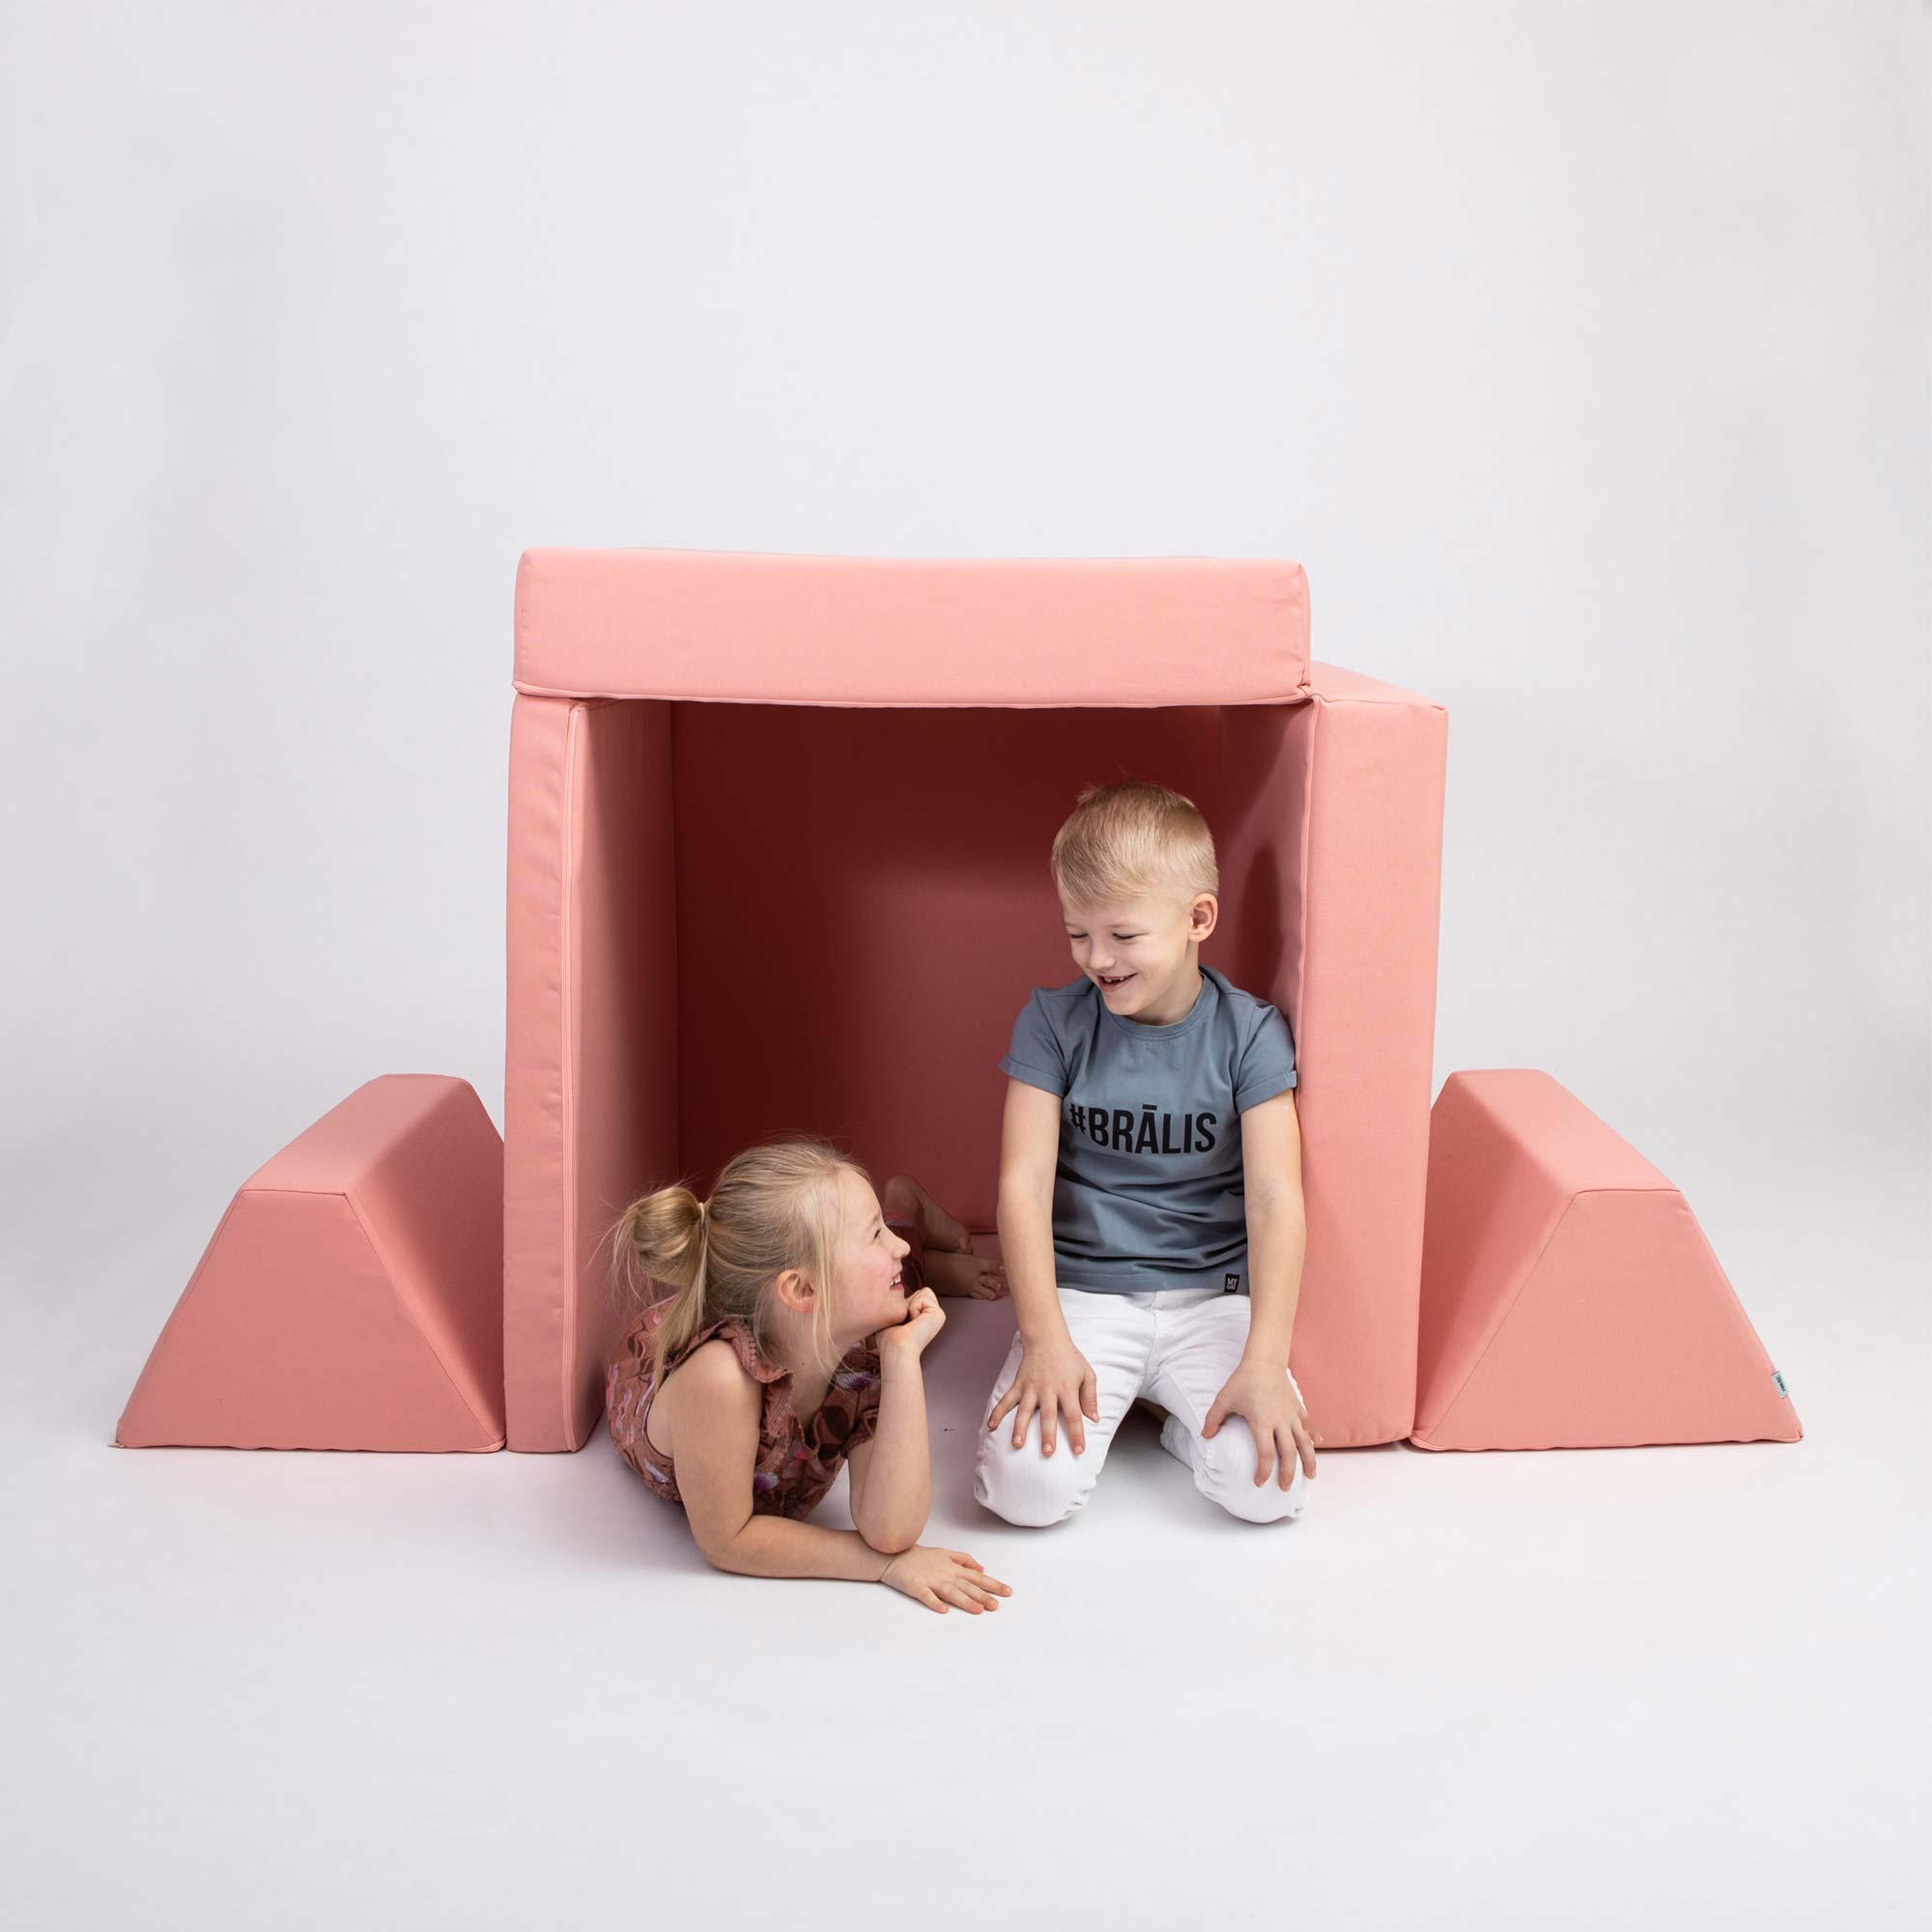 Boy and girl playing with their salmon pink Monboxy couch set